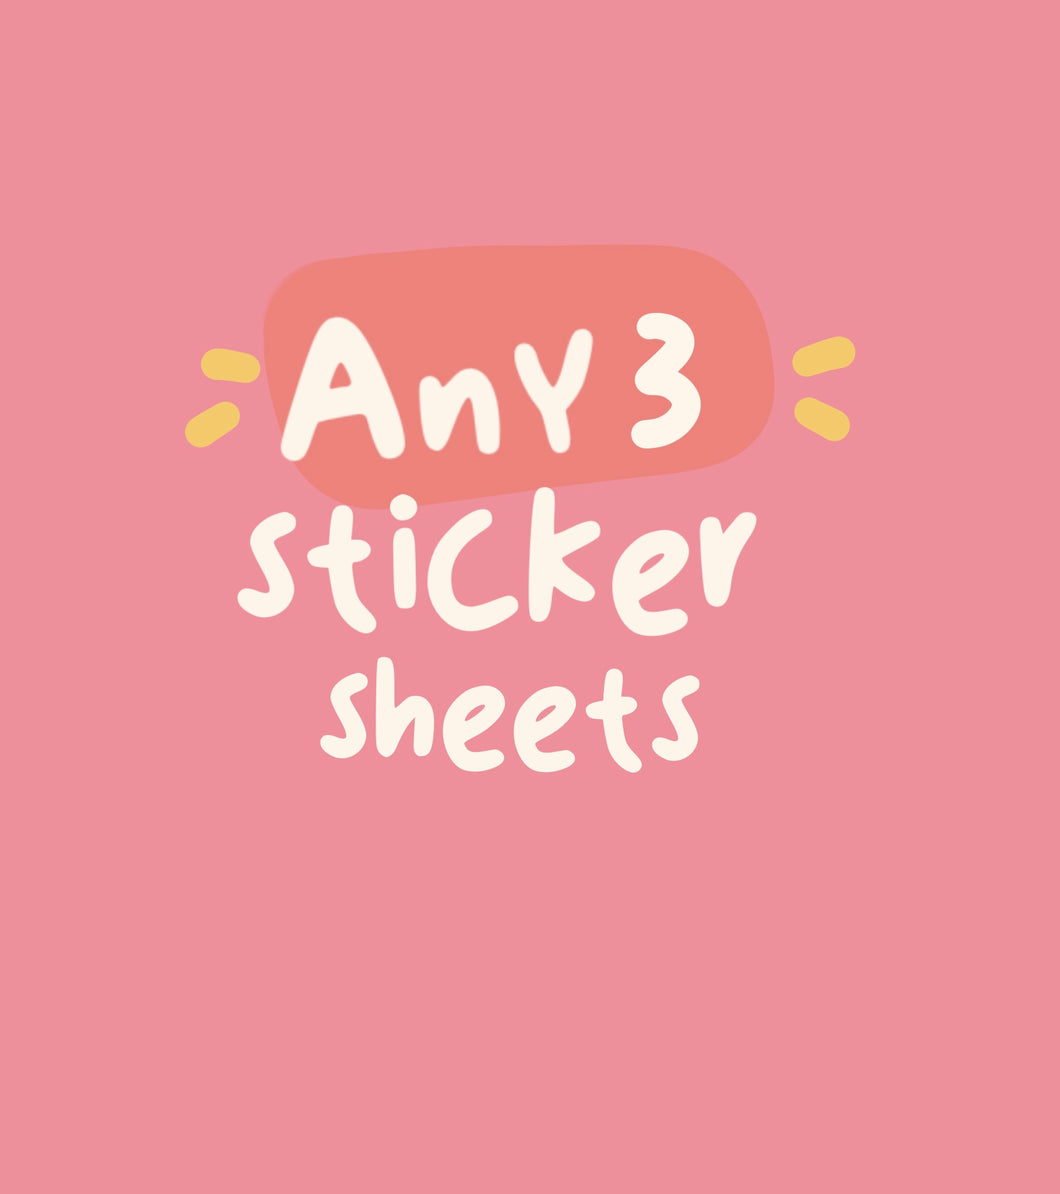 Any 3 Sticker Sheets for £15